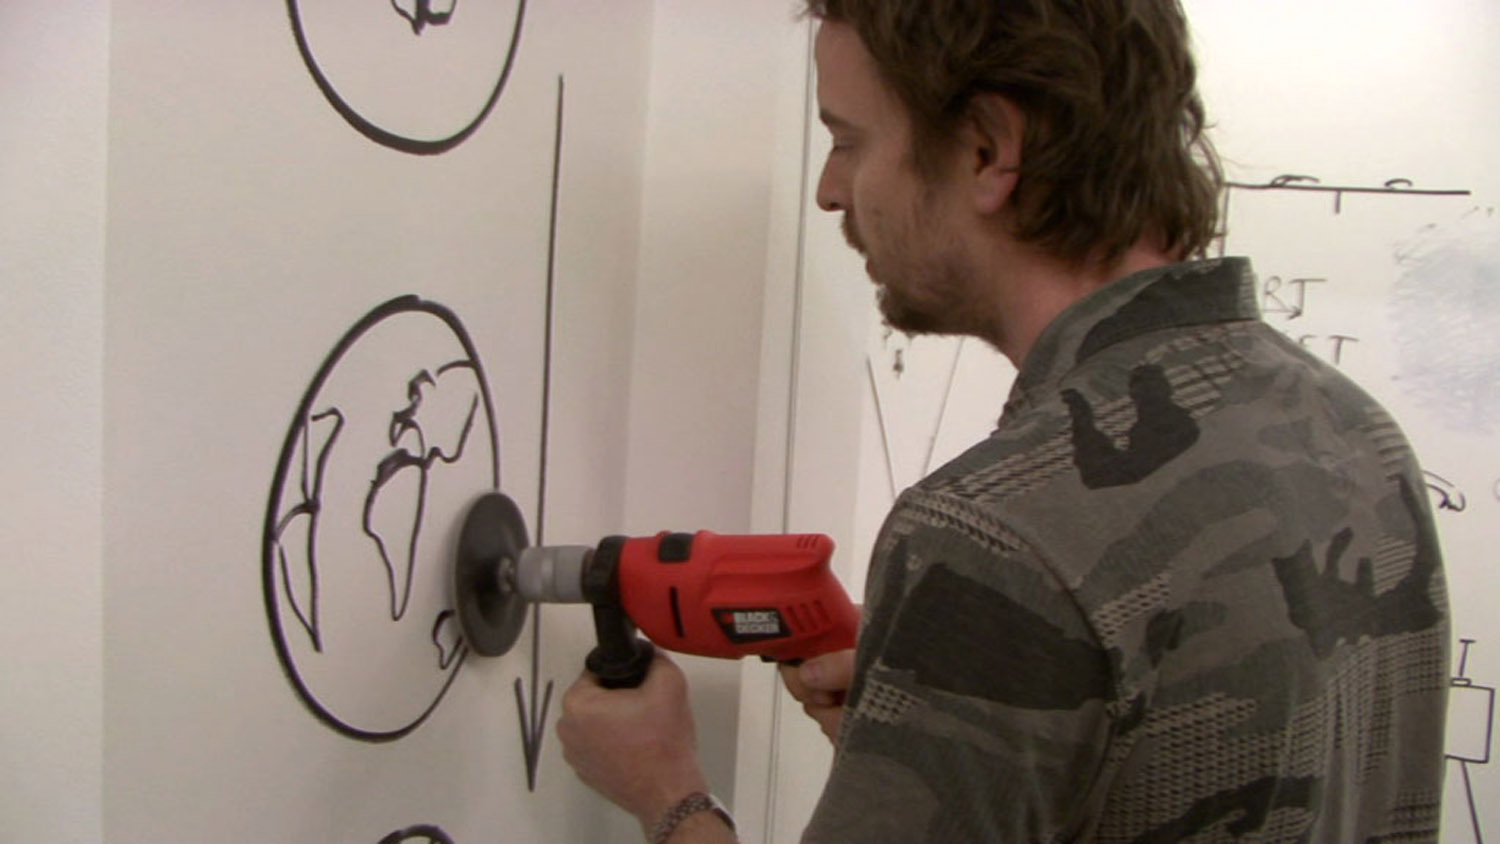 Video still from: Kalin Serapionov. Unmaking Dan, 2010. <br> 12' 59'', collective performance by the Institute of Contemporary Art – Sofia members deleting Dan Perjovschi’s wall drawings after his exhibition at Institute of Contemporary Art – Sofia Gallery in 2010.